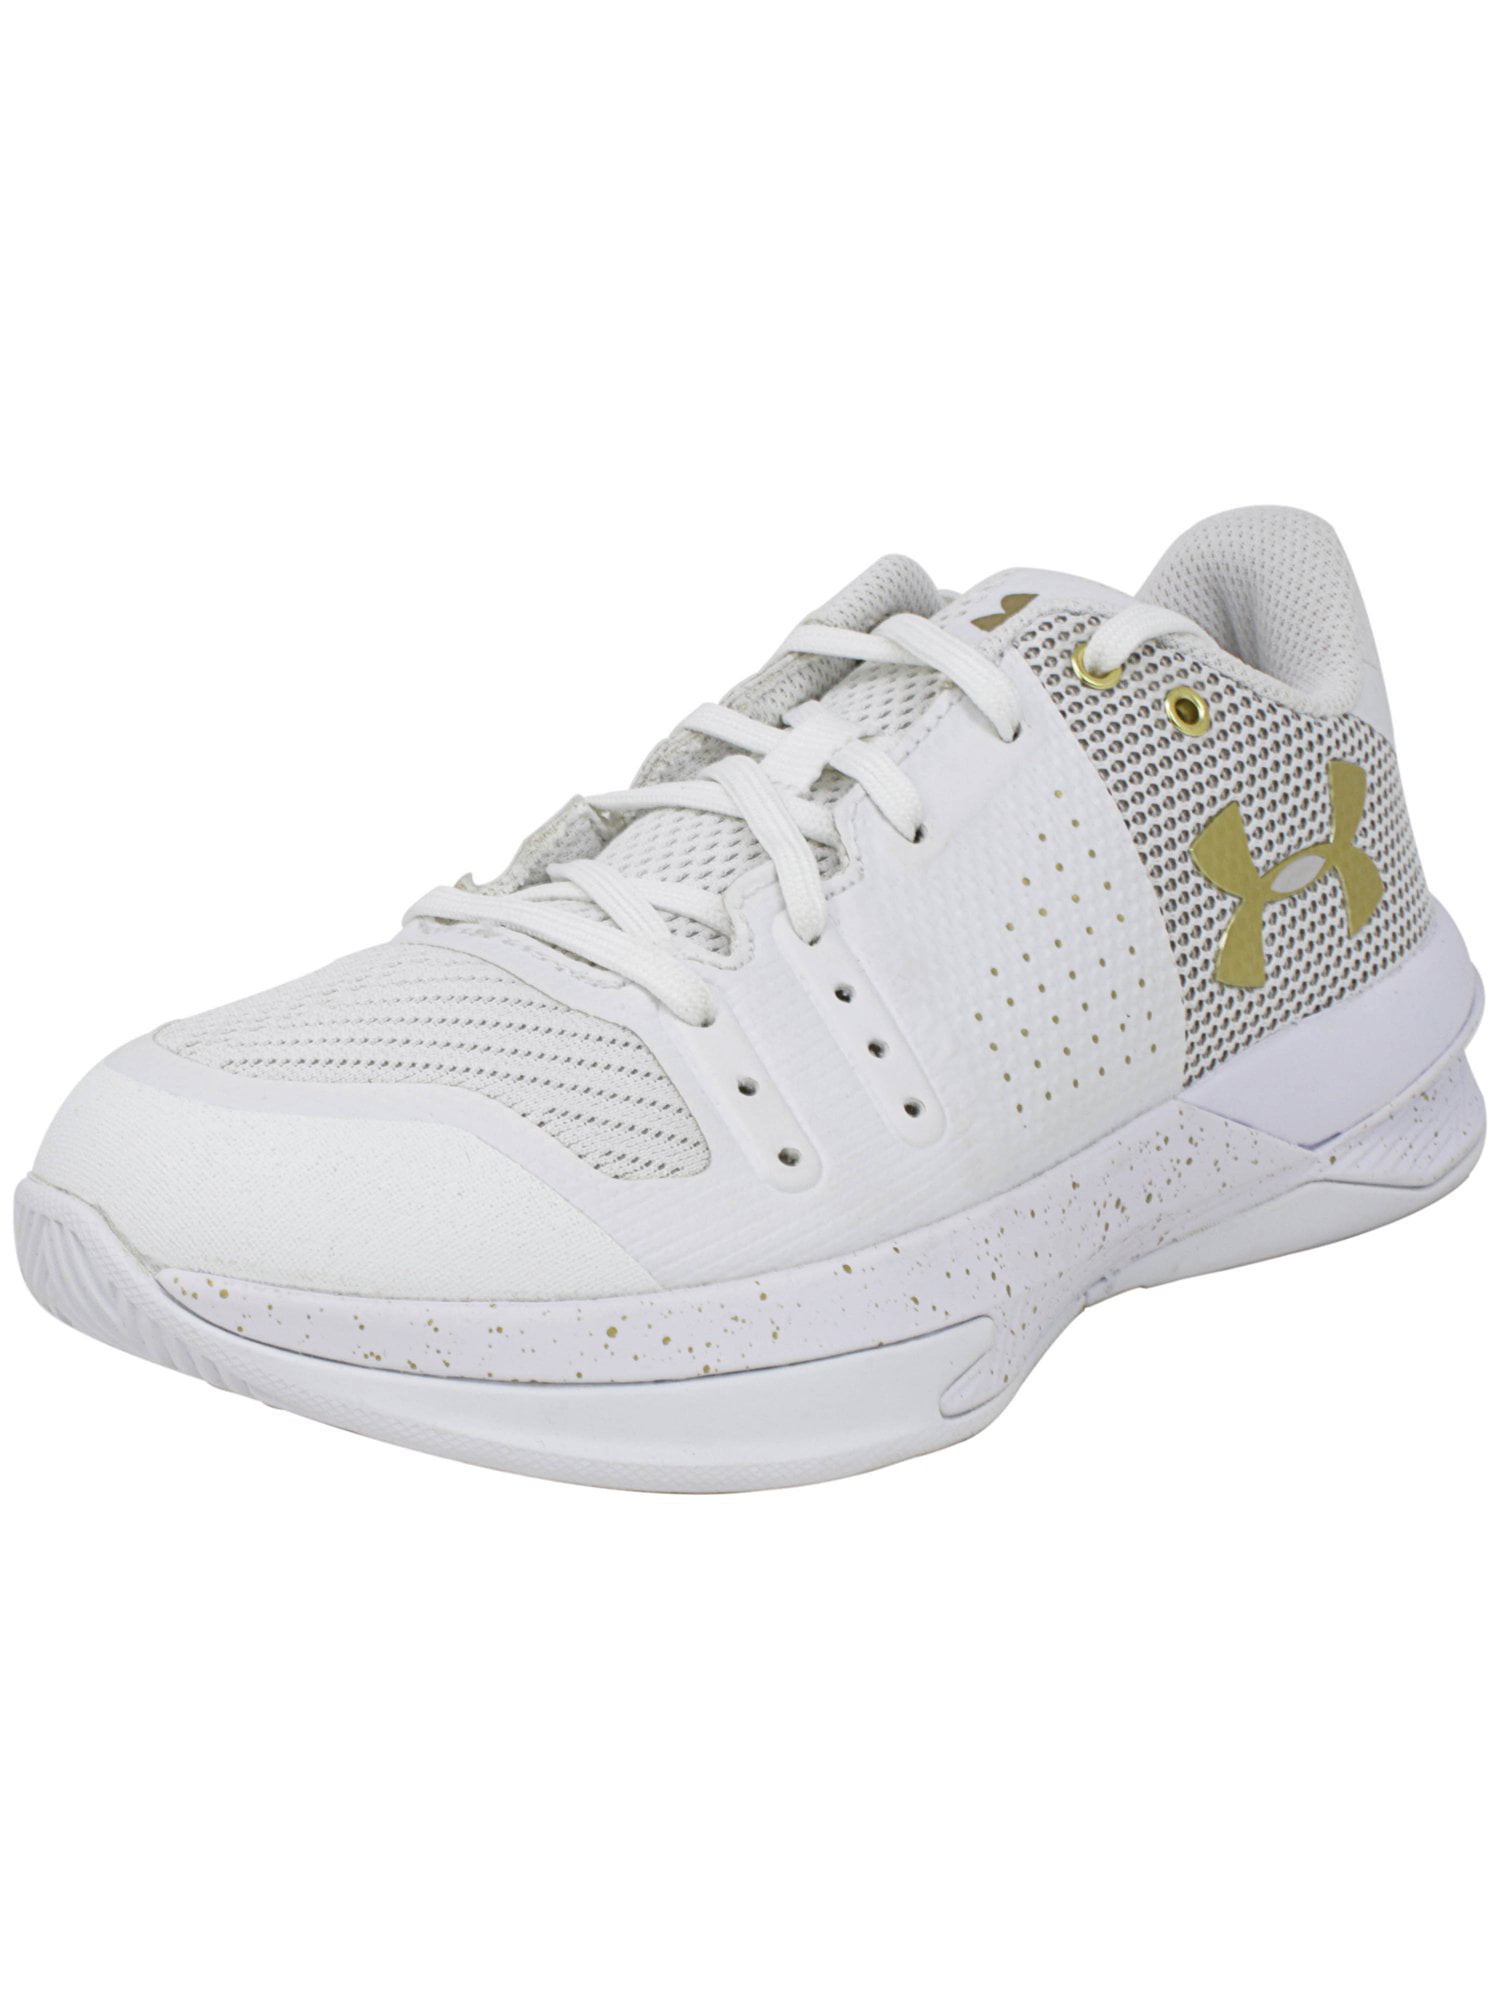 under armour white volleyball shoes